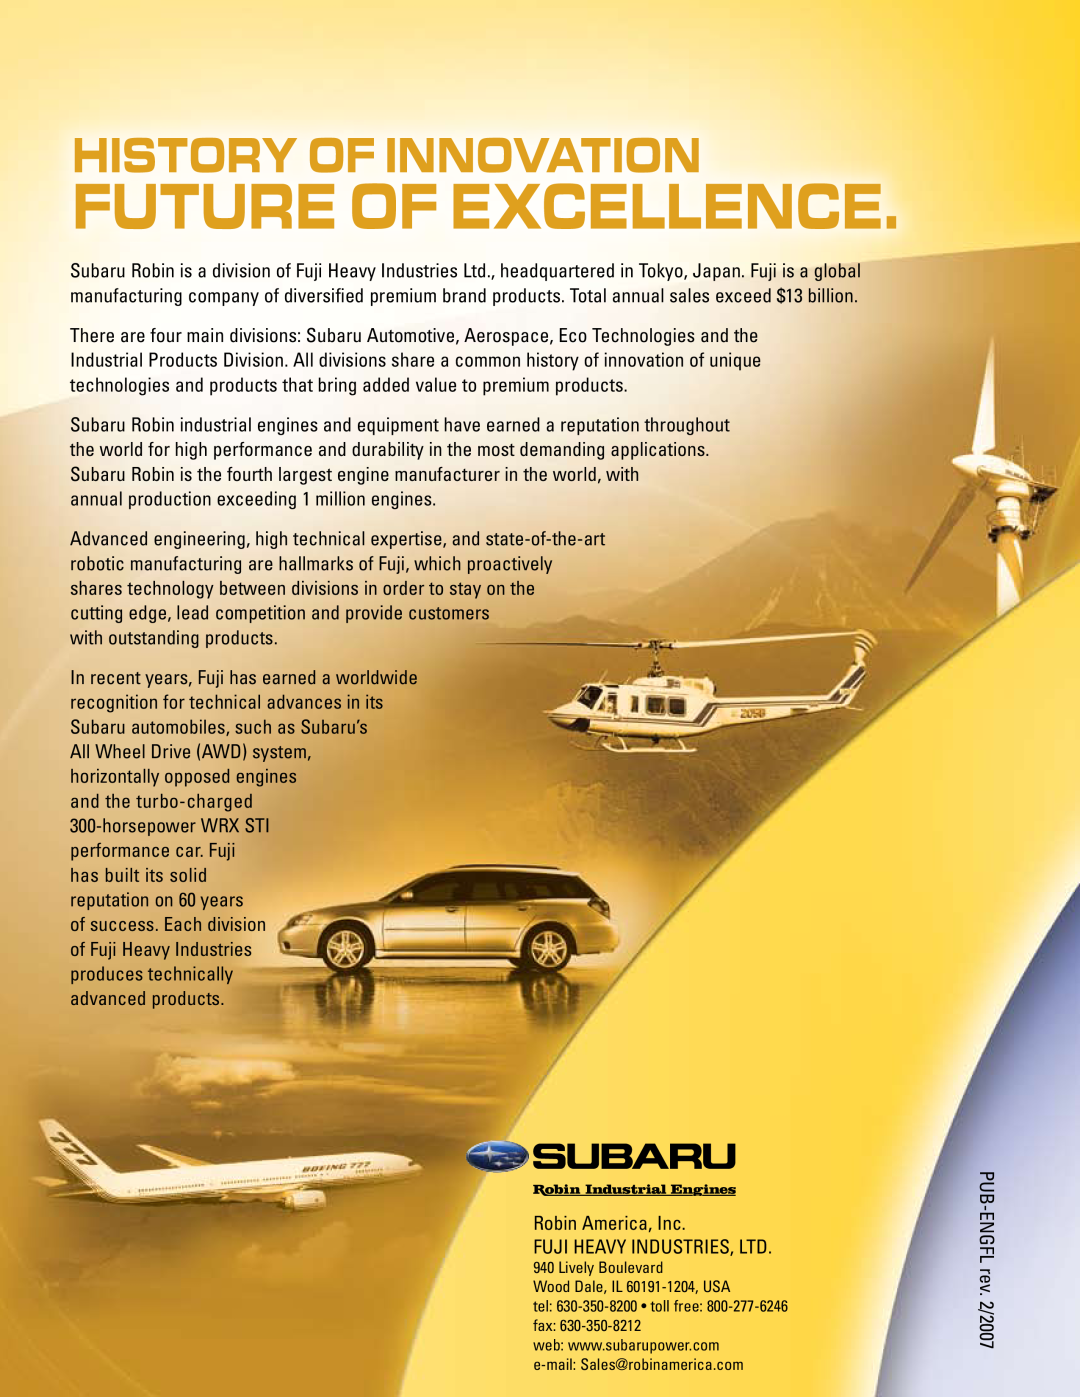 Subaru Robin Power Products EX27 manual Future Of Excellence, History Of Innovation, with outstanding products 